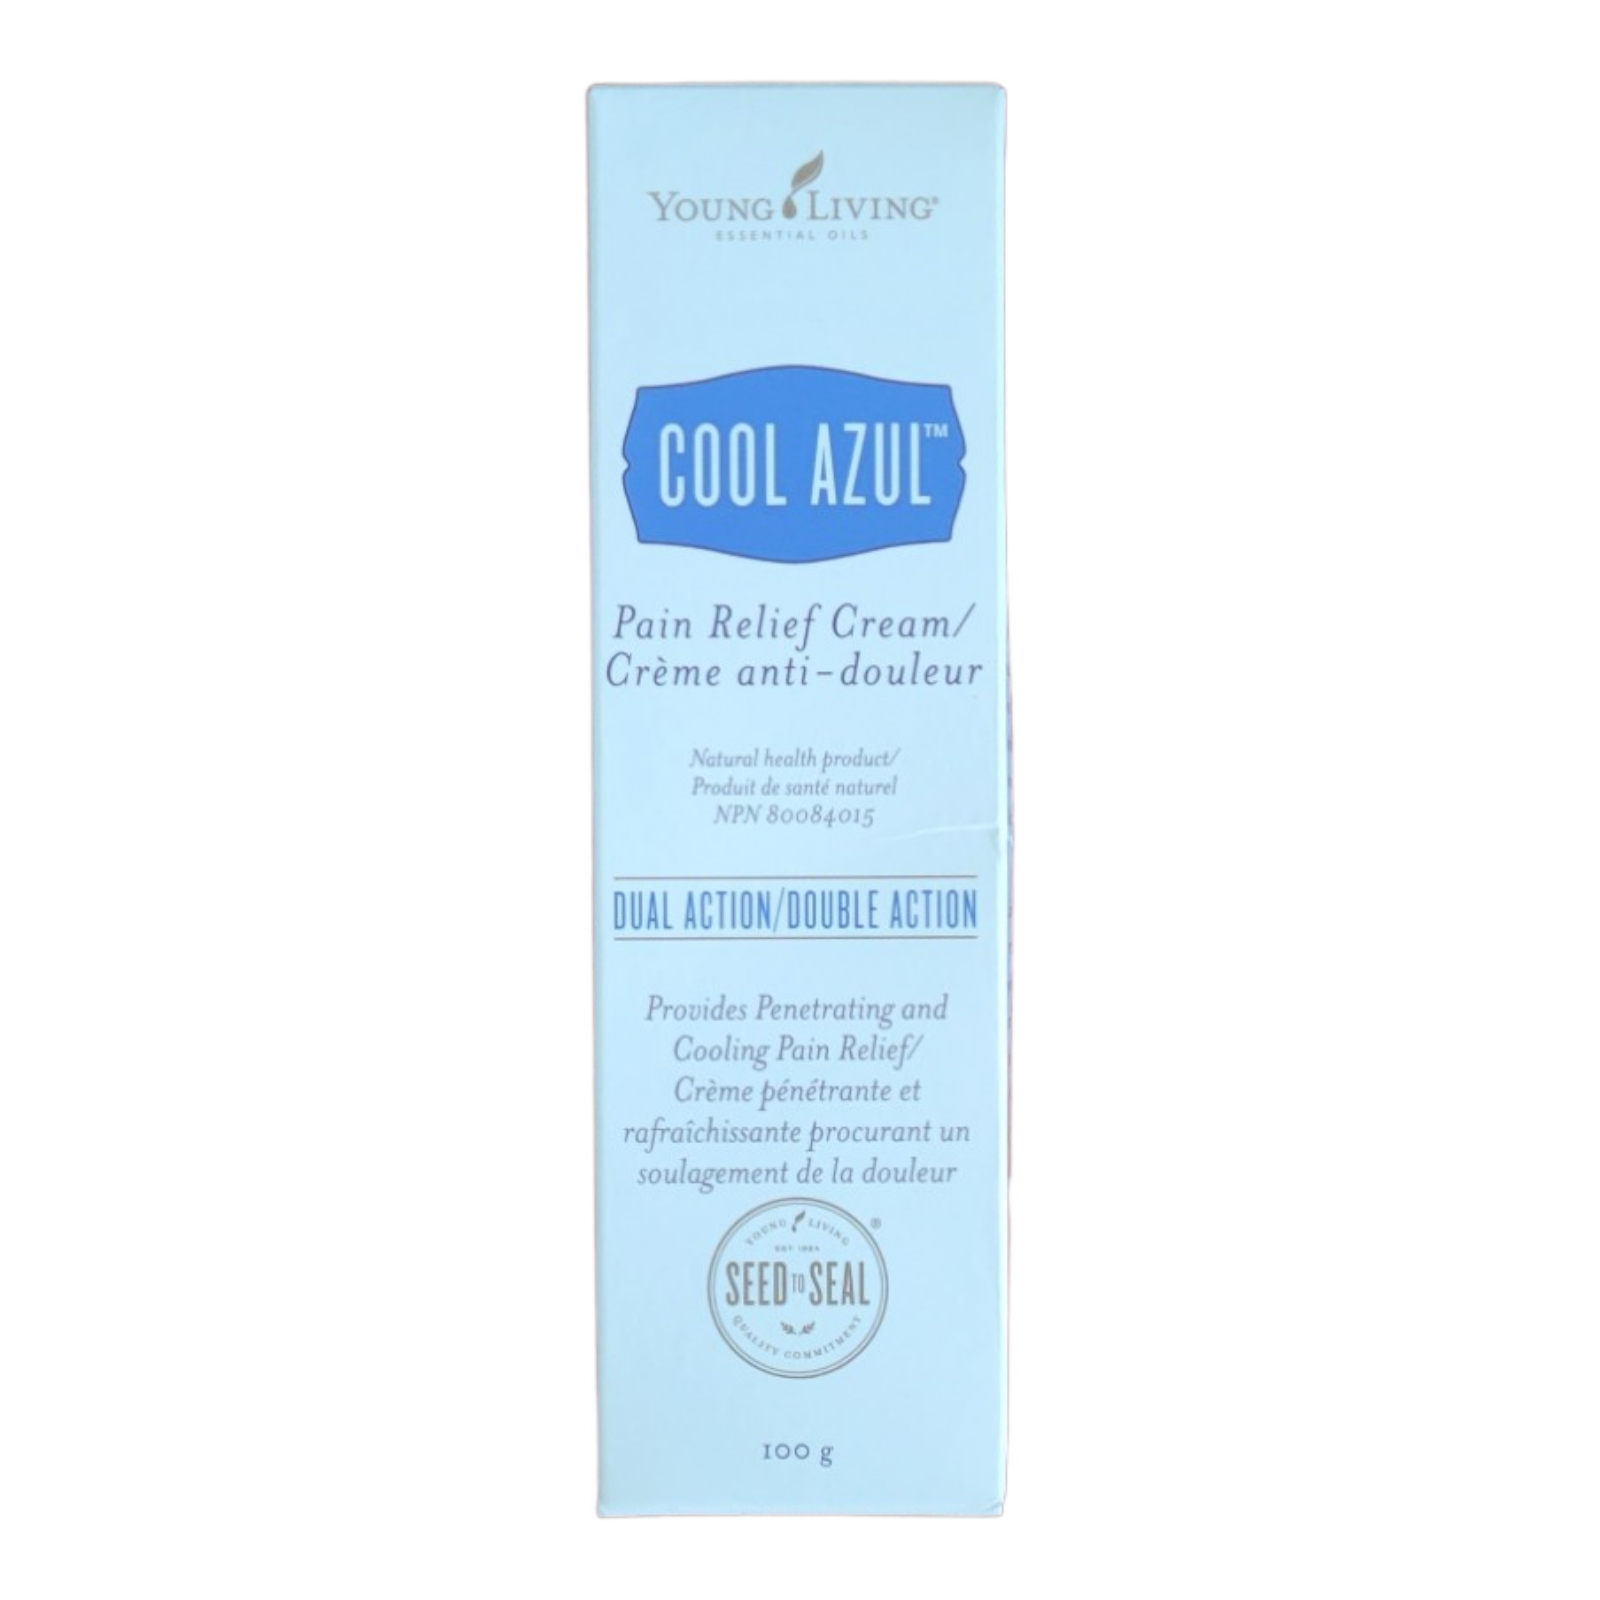 Young Living Cool Azul Cream (100 g) - New - Free Shipping - $55.00